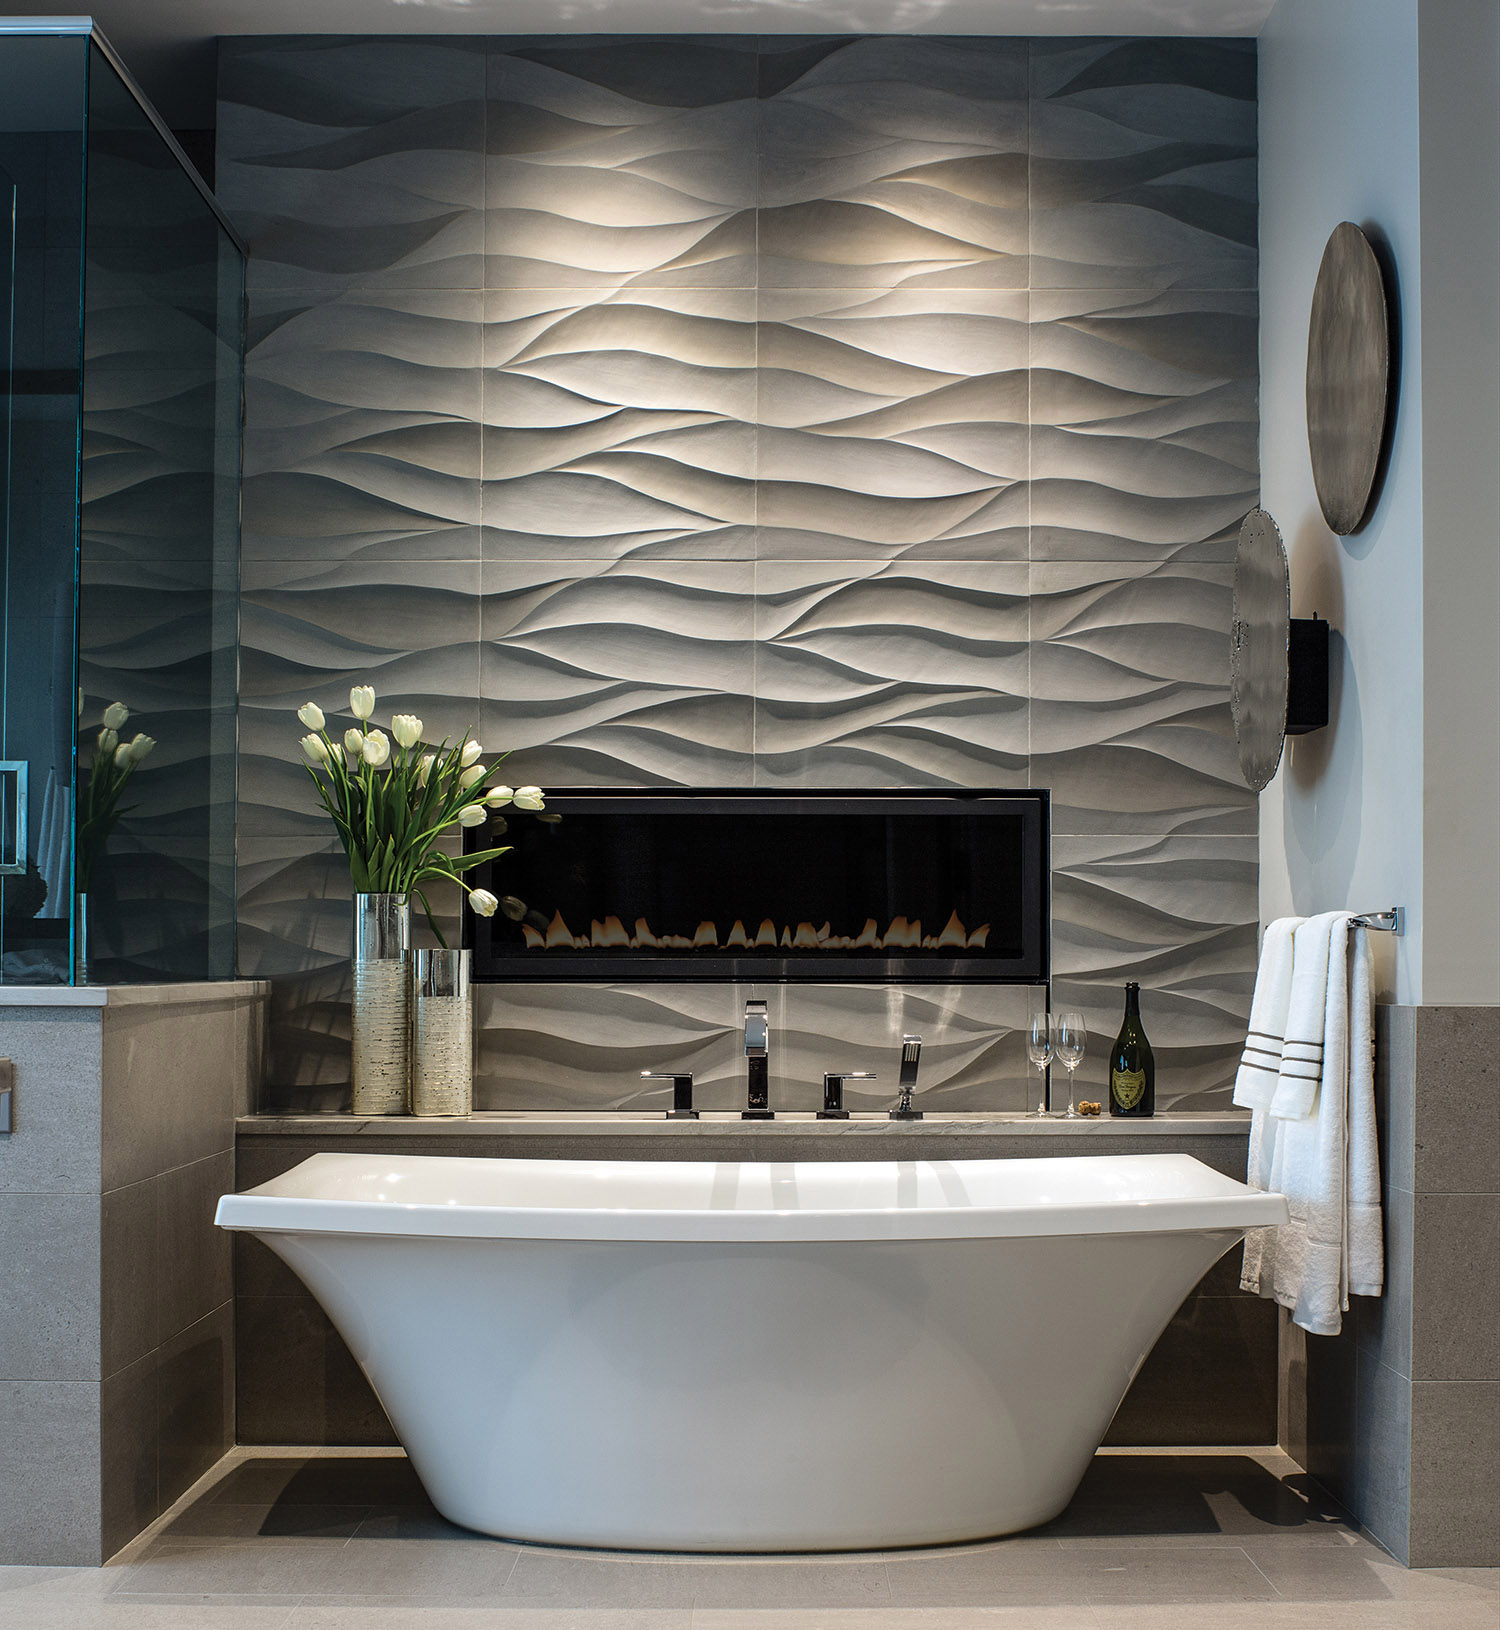 The contrast between the free-standing soaker tub and the wave-patterned tile wall adds drama to the master bath. The tile, carried in-house by Allard & Roberts, is carved stone. Lighting by Lux Lighting. At press-time, this photo had been added to almost 20,000 “ideabooks” on the website Houzz.com. Photo by David Dietrich